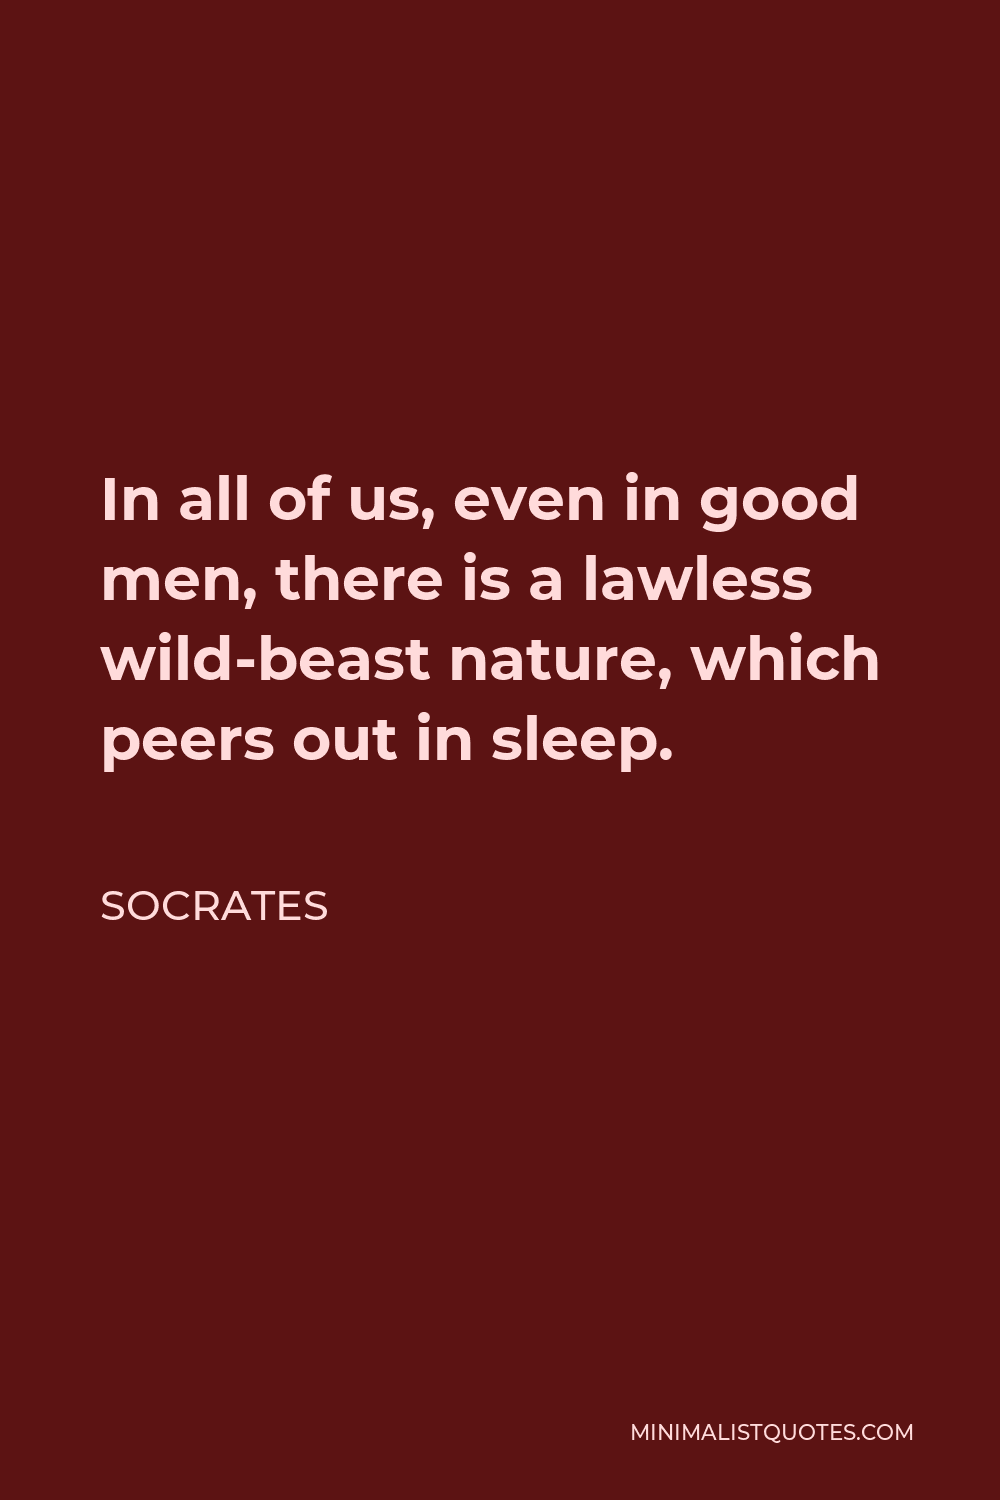 Socrates Quote - In all of us, even in good men, there is a lawless wild-beast nature, which peers out in sleep.